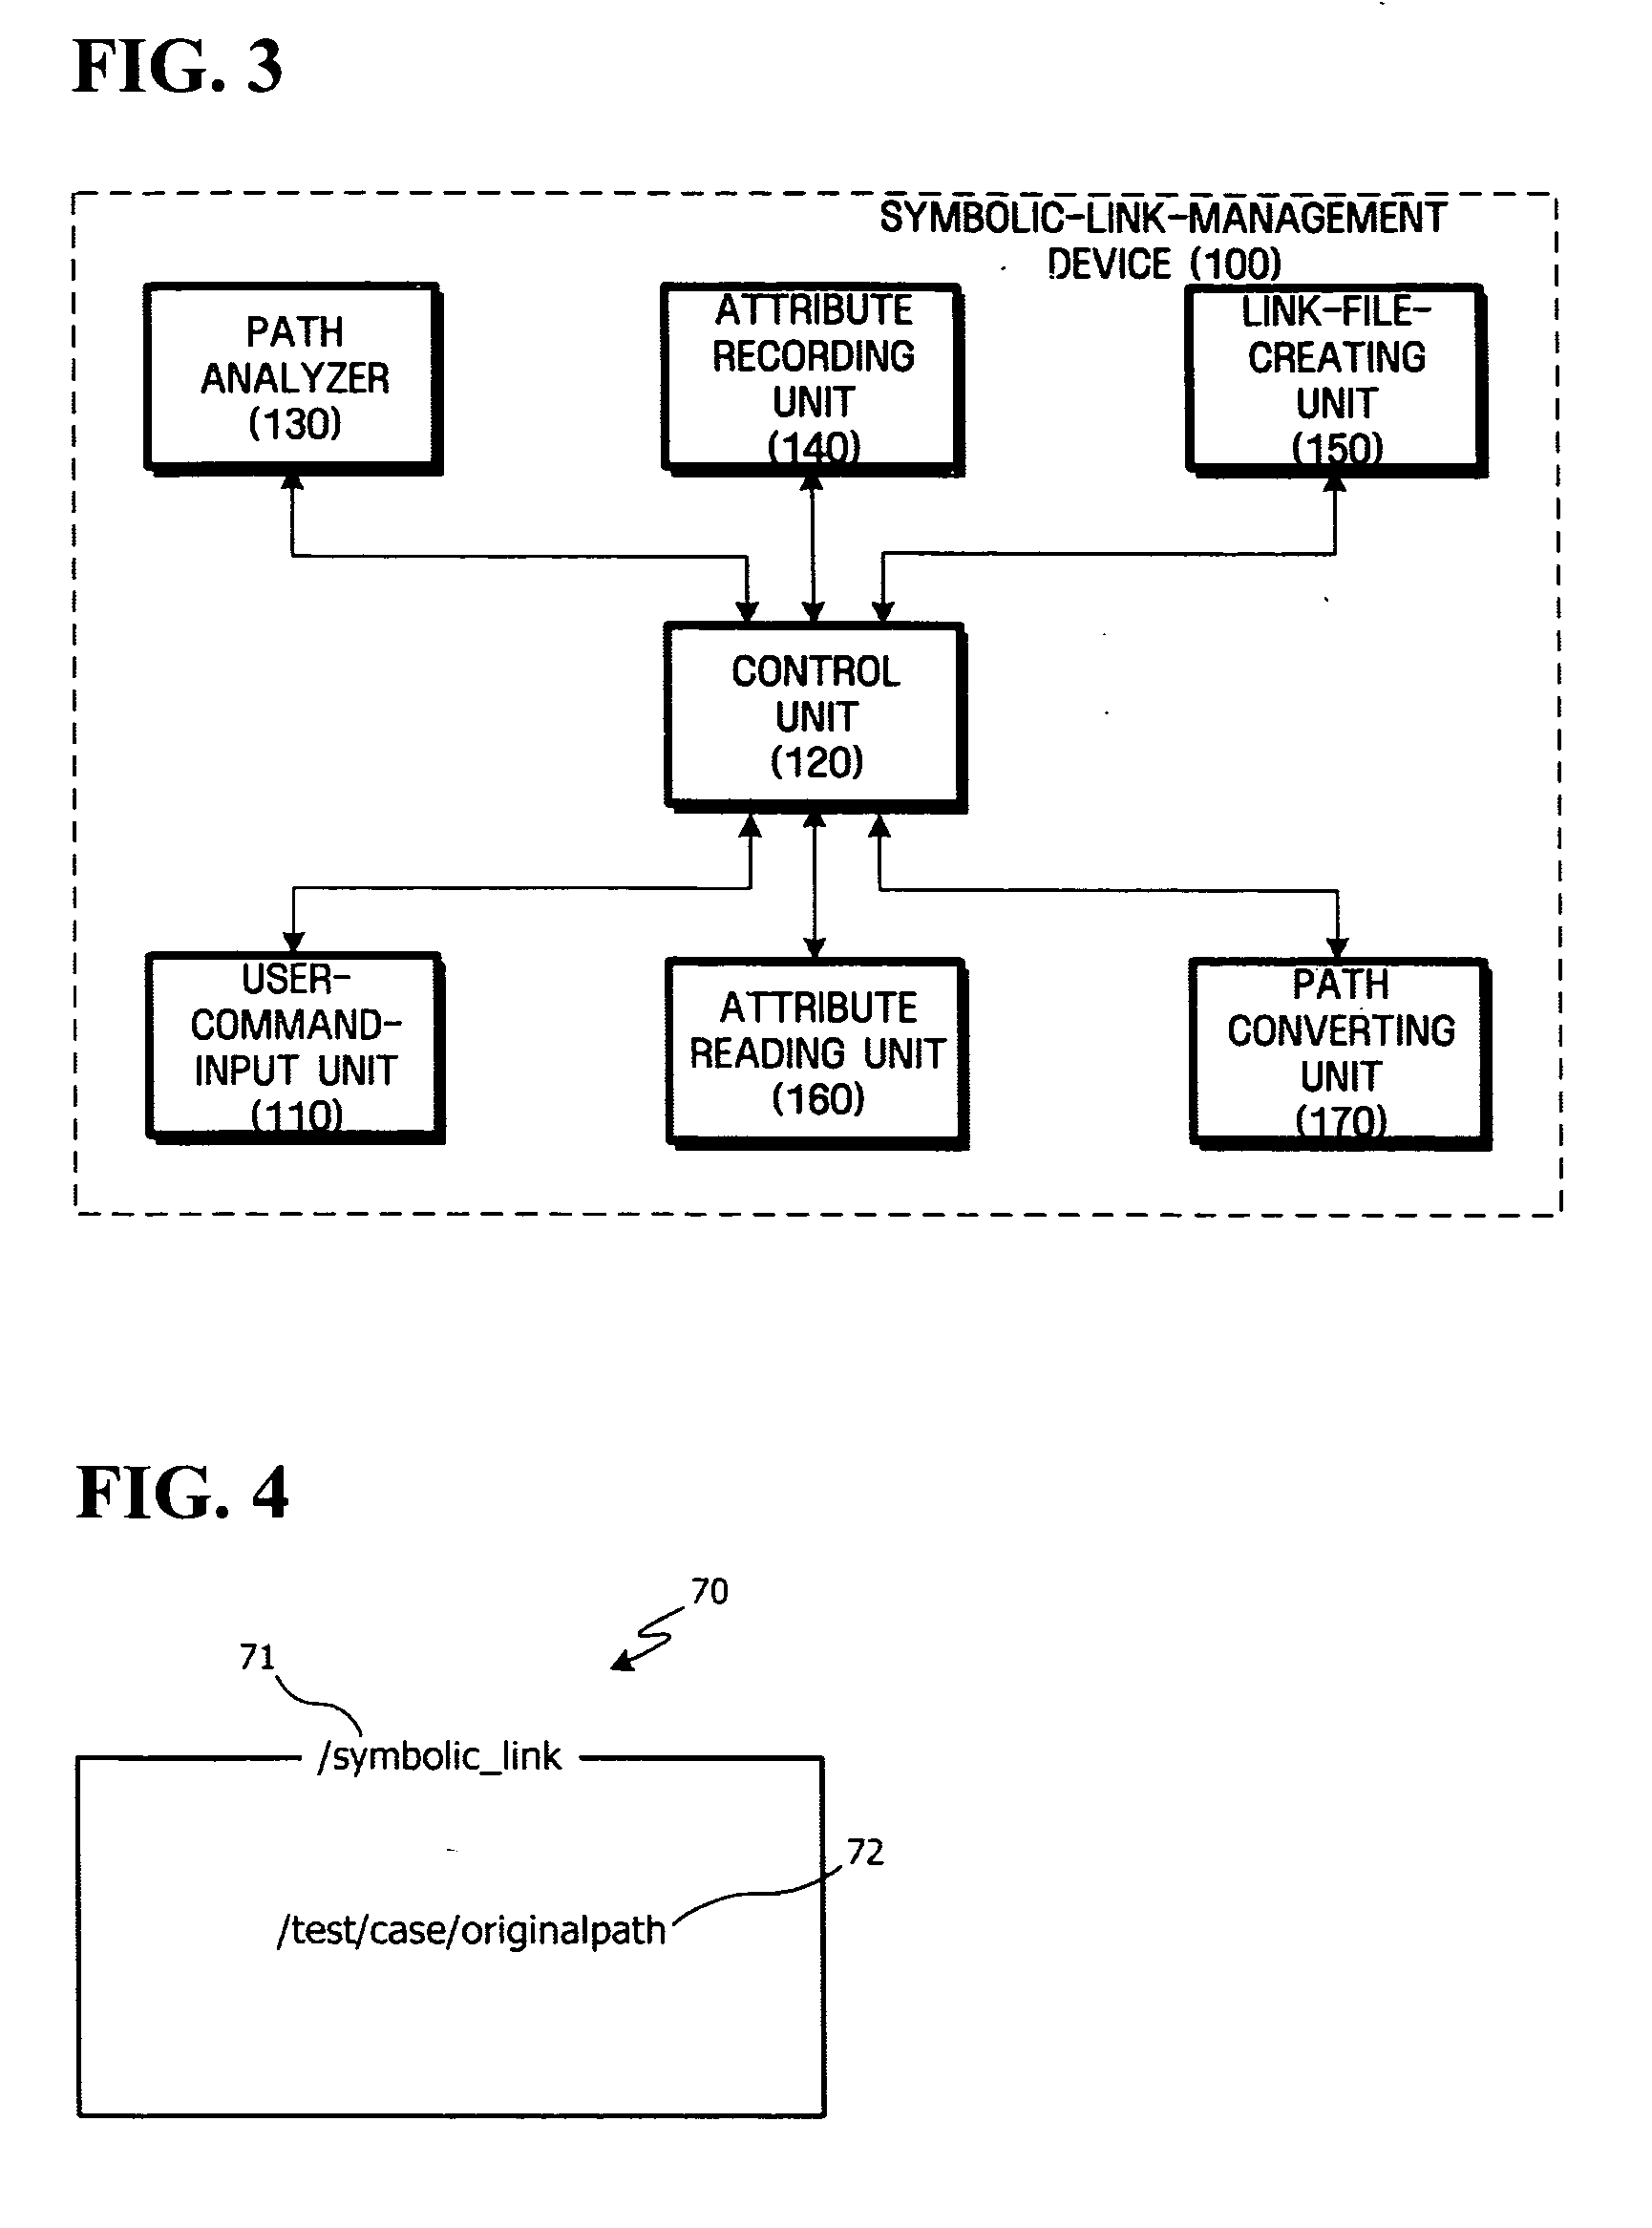 Method of creating symoblic link capable of being compatible with file system, and method and apparatus for accessing file or directory by using symbolic link